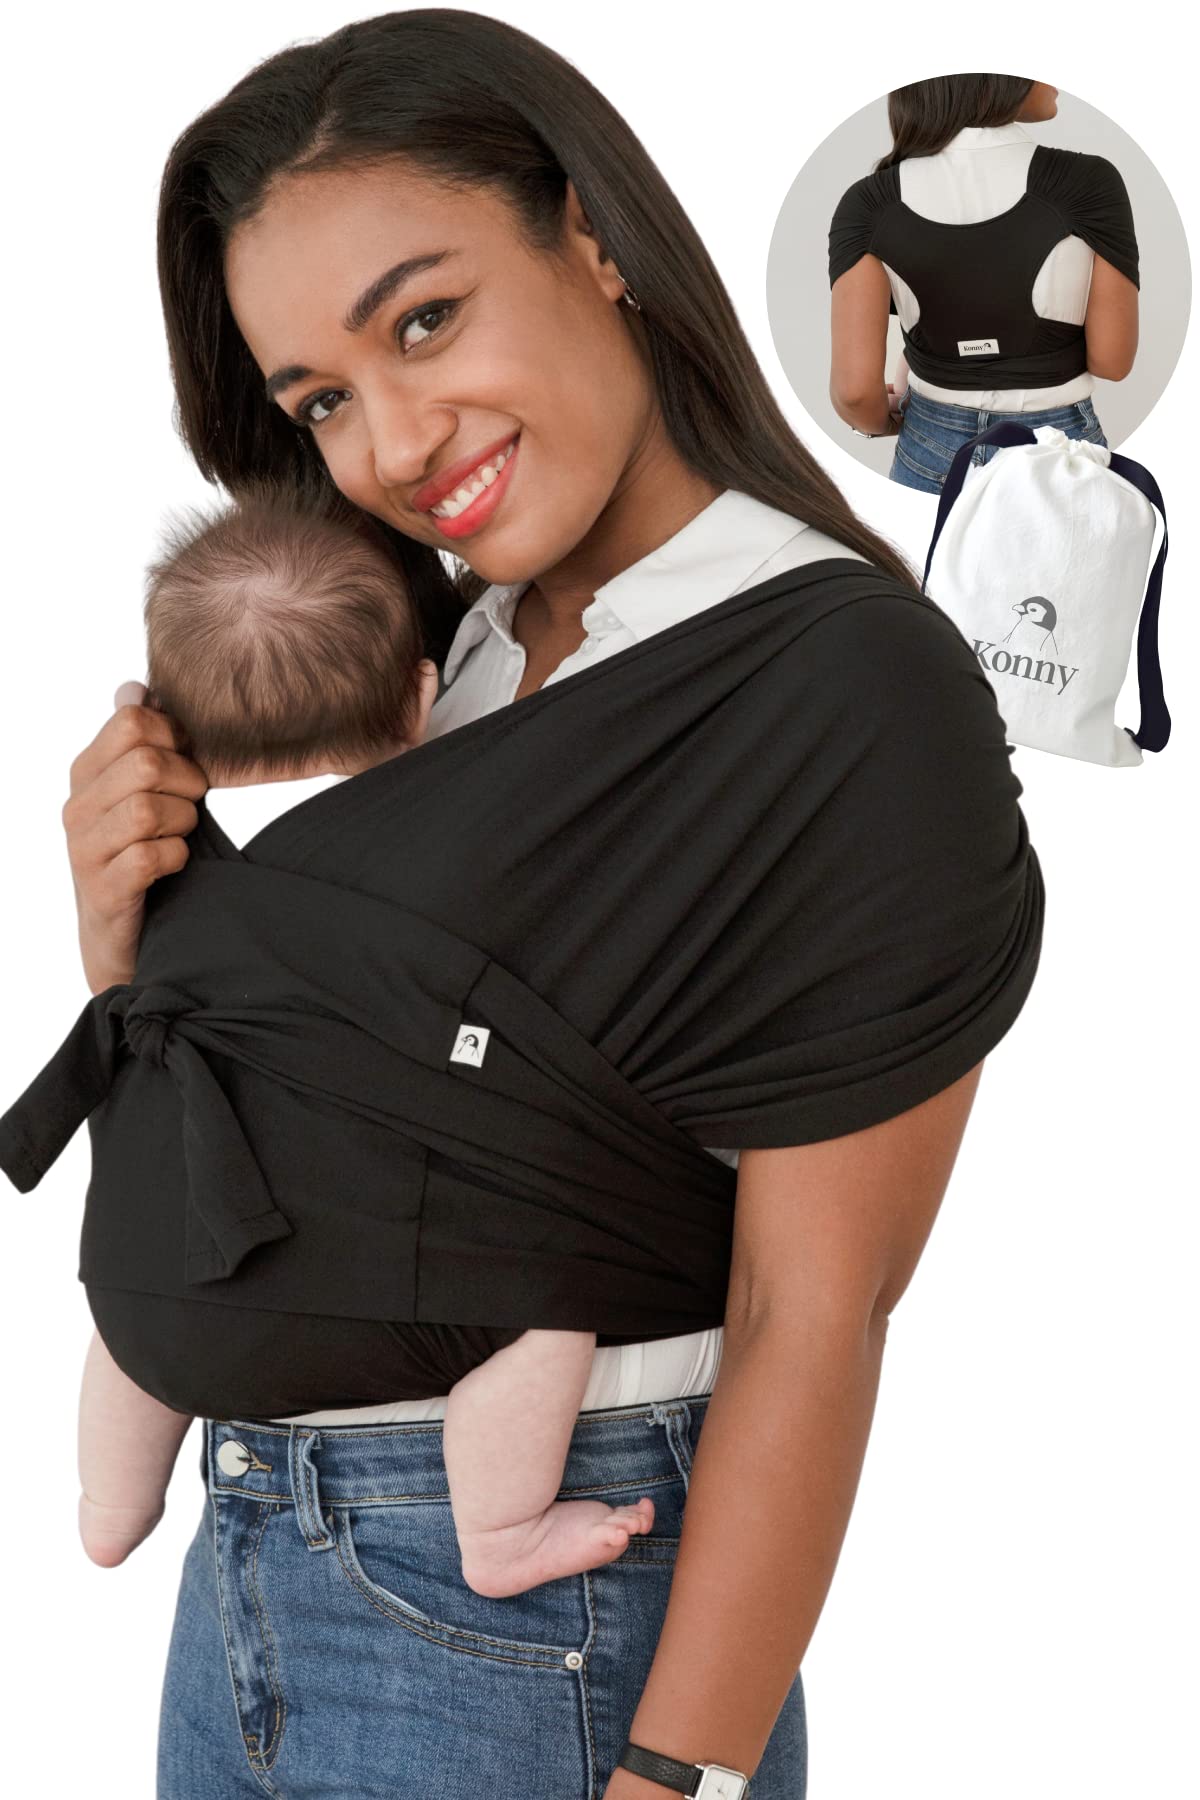 Konny Baby carrier - custom Fit carrier, Hassle-Free, Easy to Wear Infant Sling Wrap, Perfect for Newborn Babies up to 4